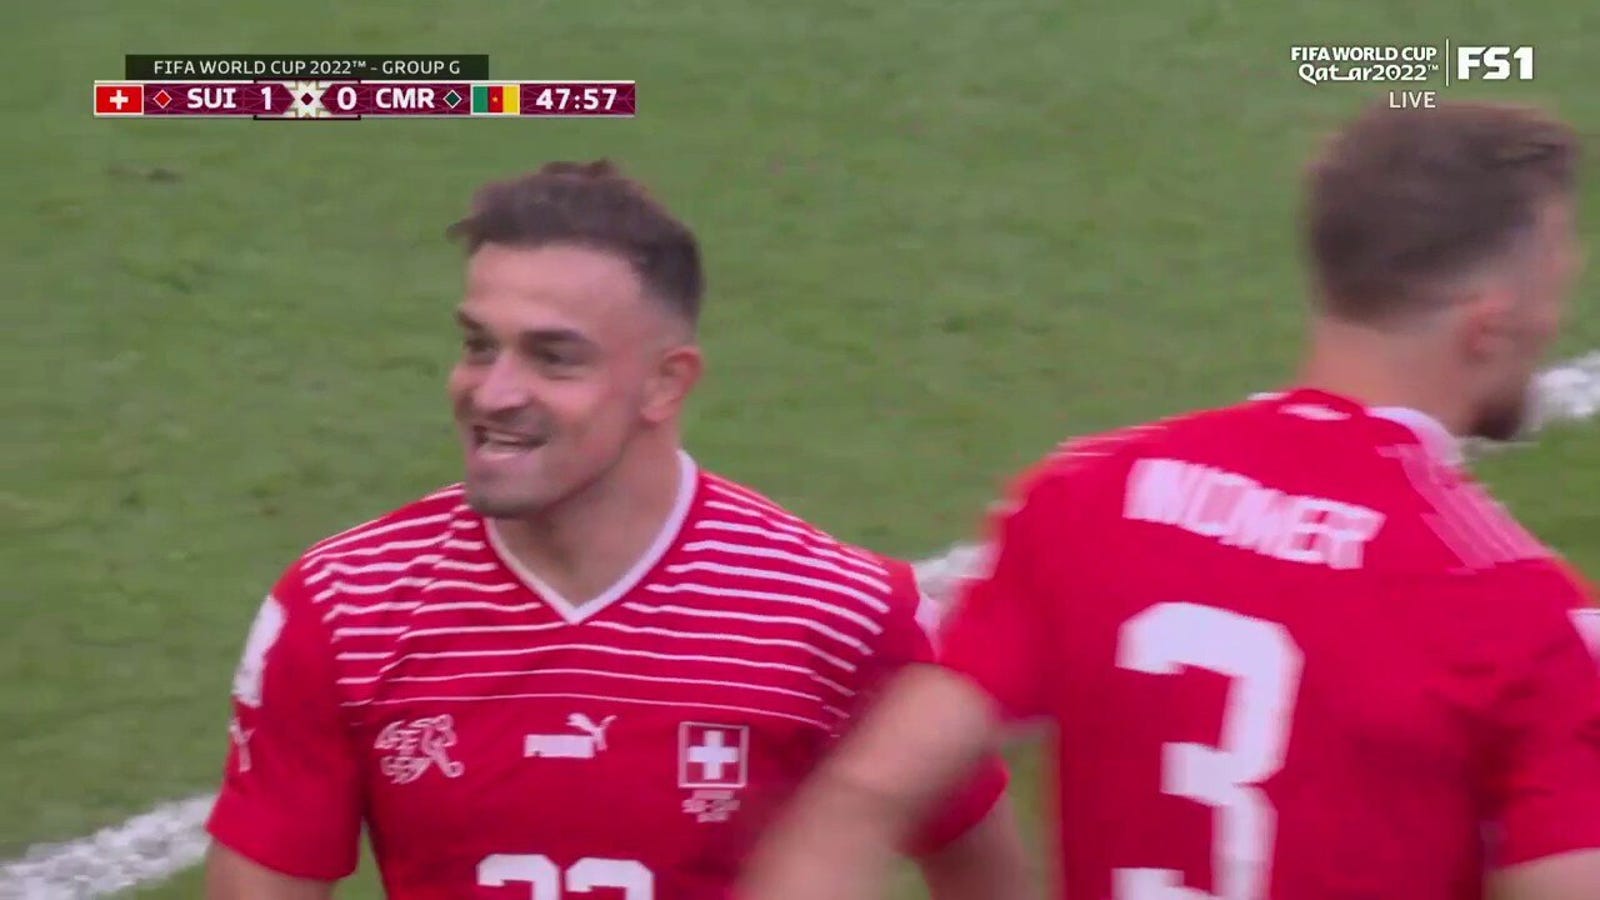 Brill Empolo scores Switzerland's goal against Cameroon in the 48th minute 